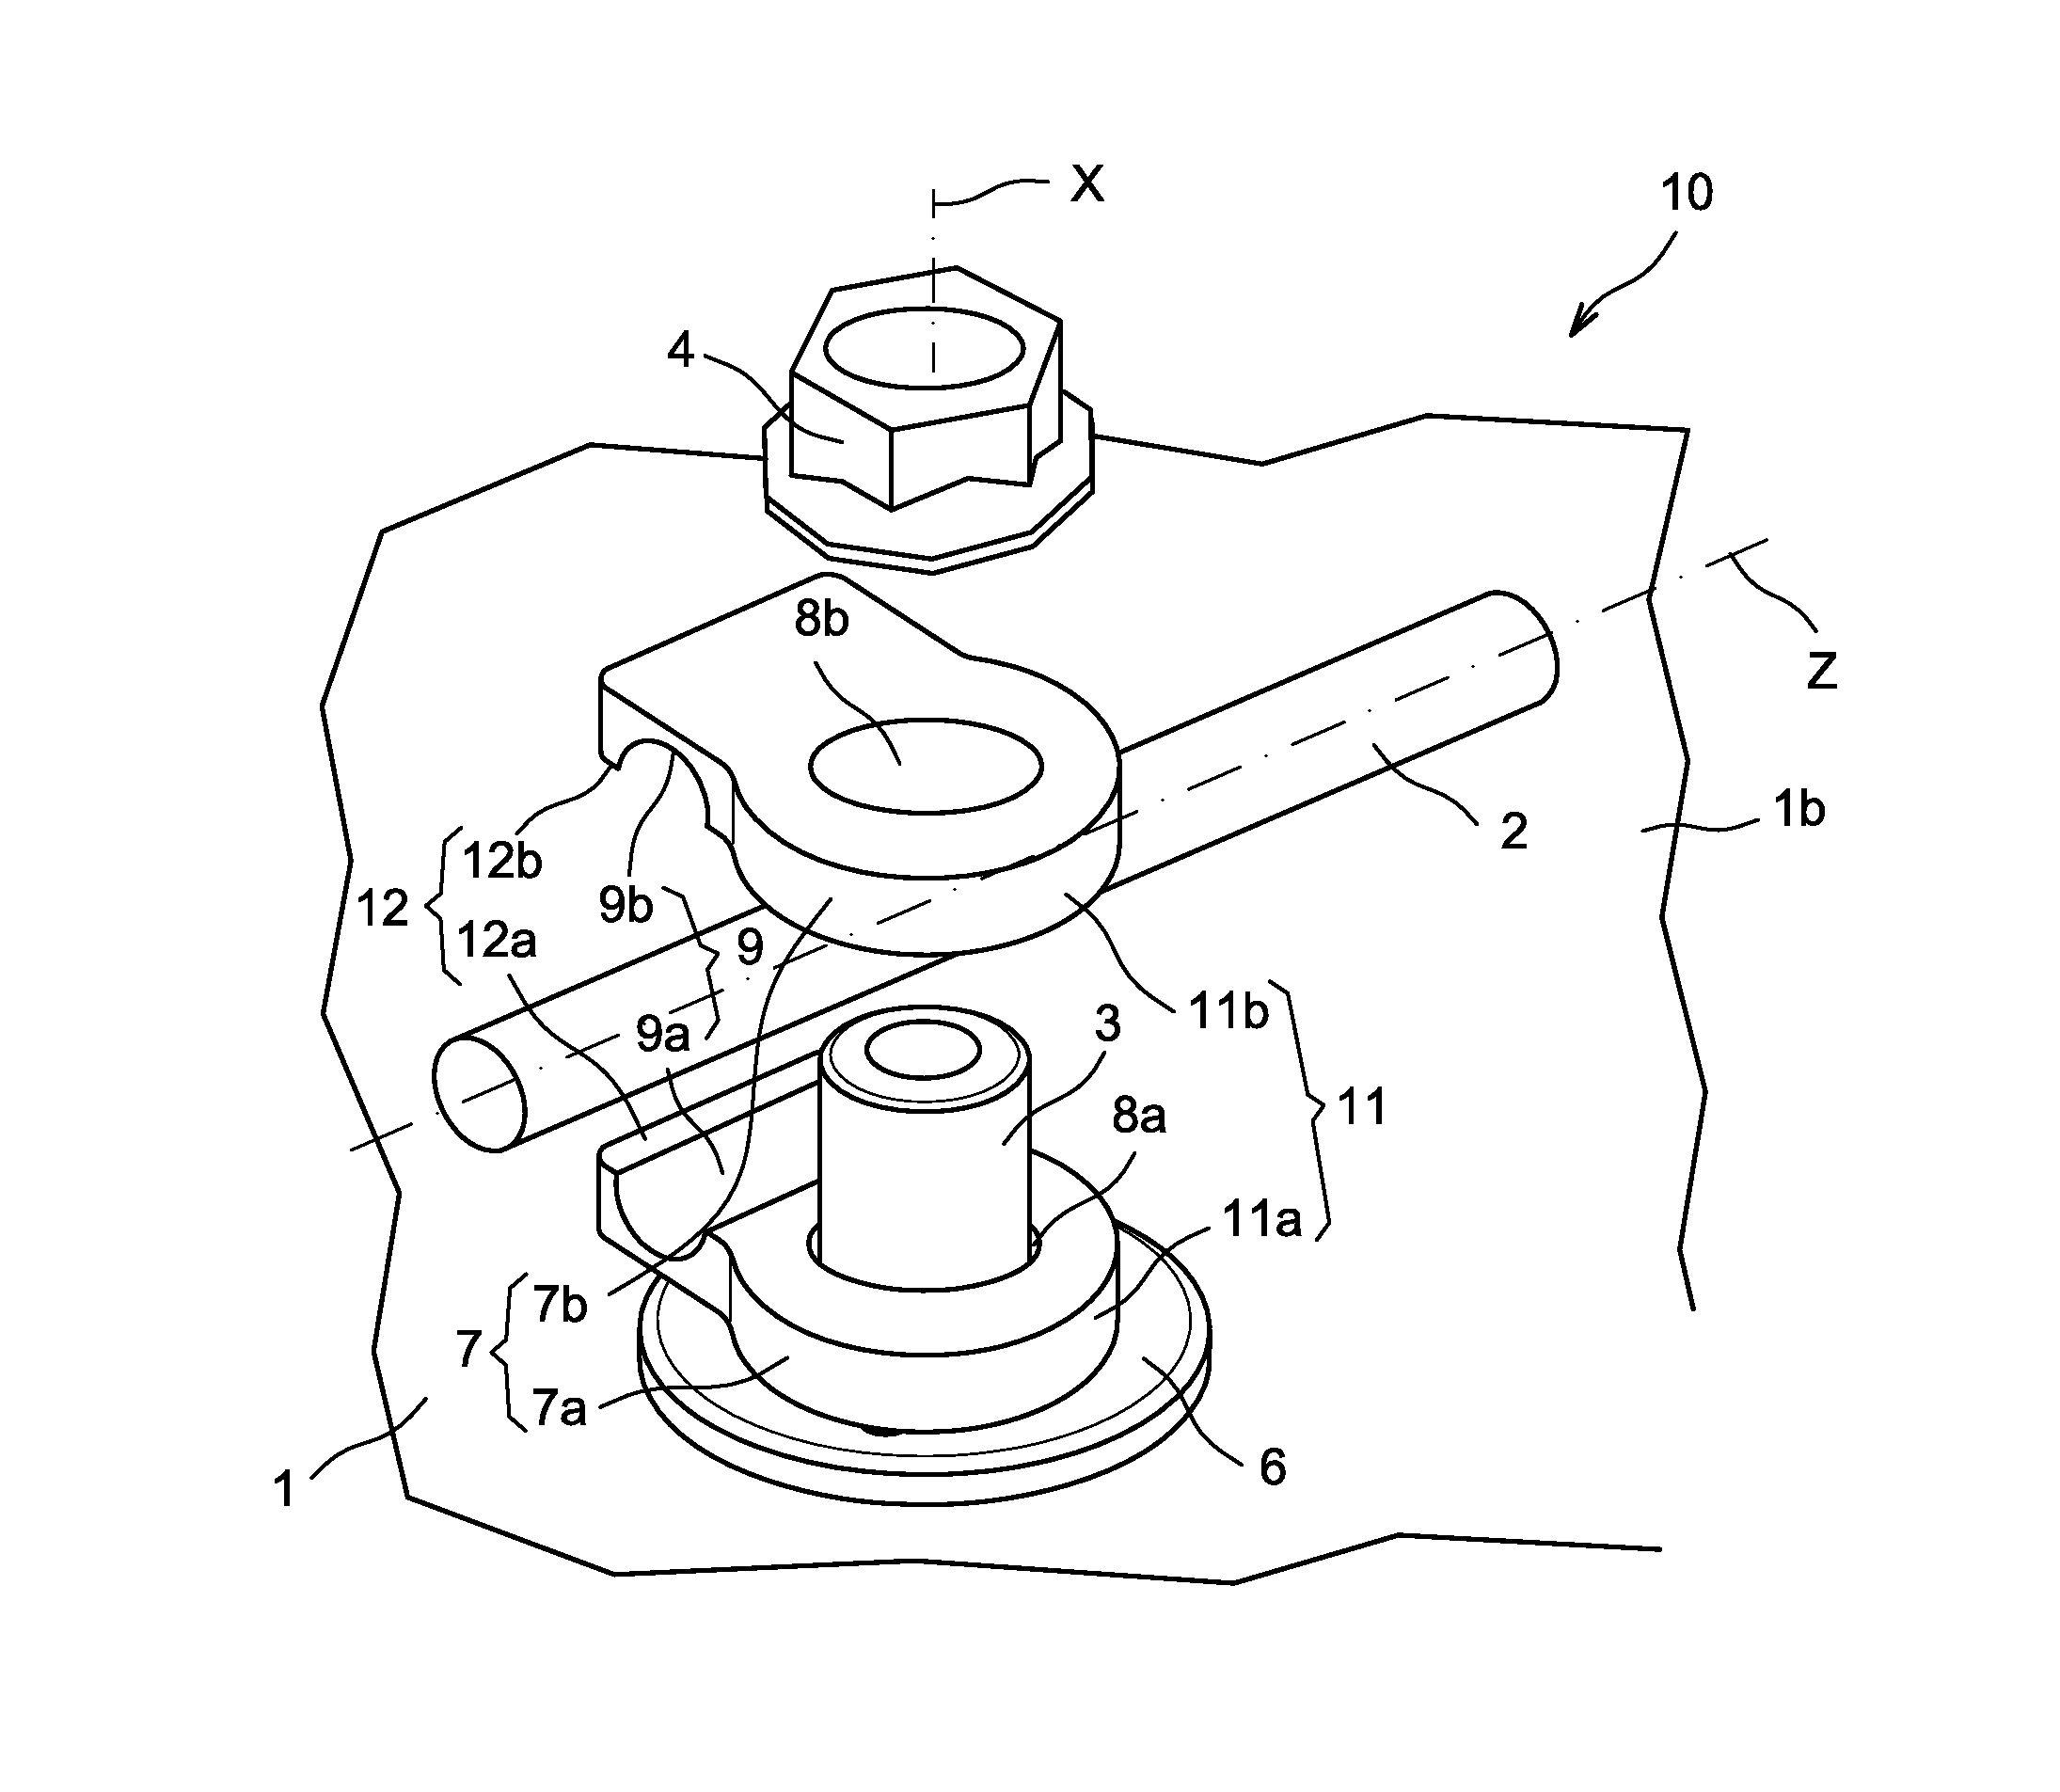 Lightning conductor system comprising a lightning conductor strip mounted in an offset manner